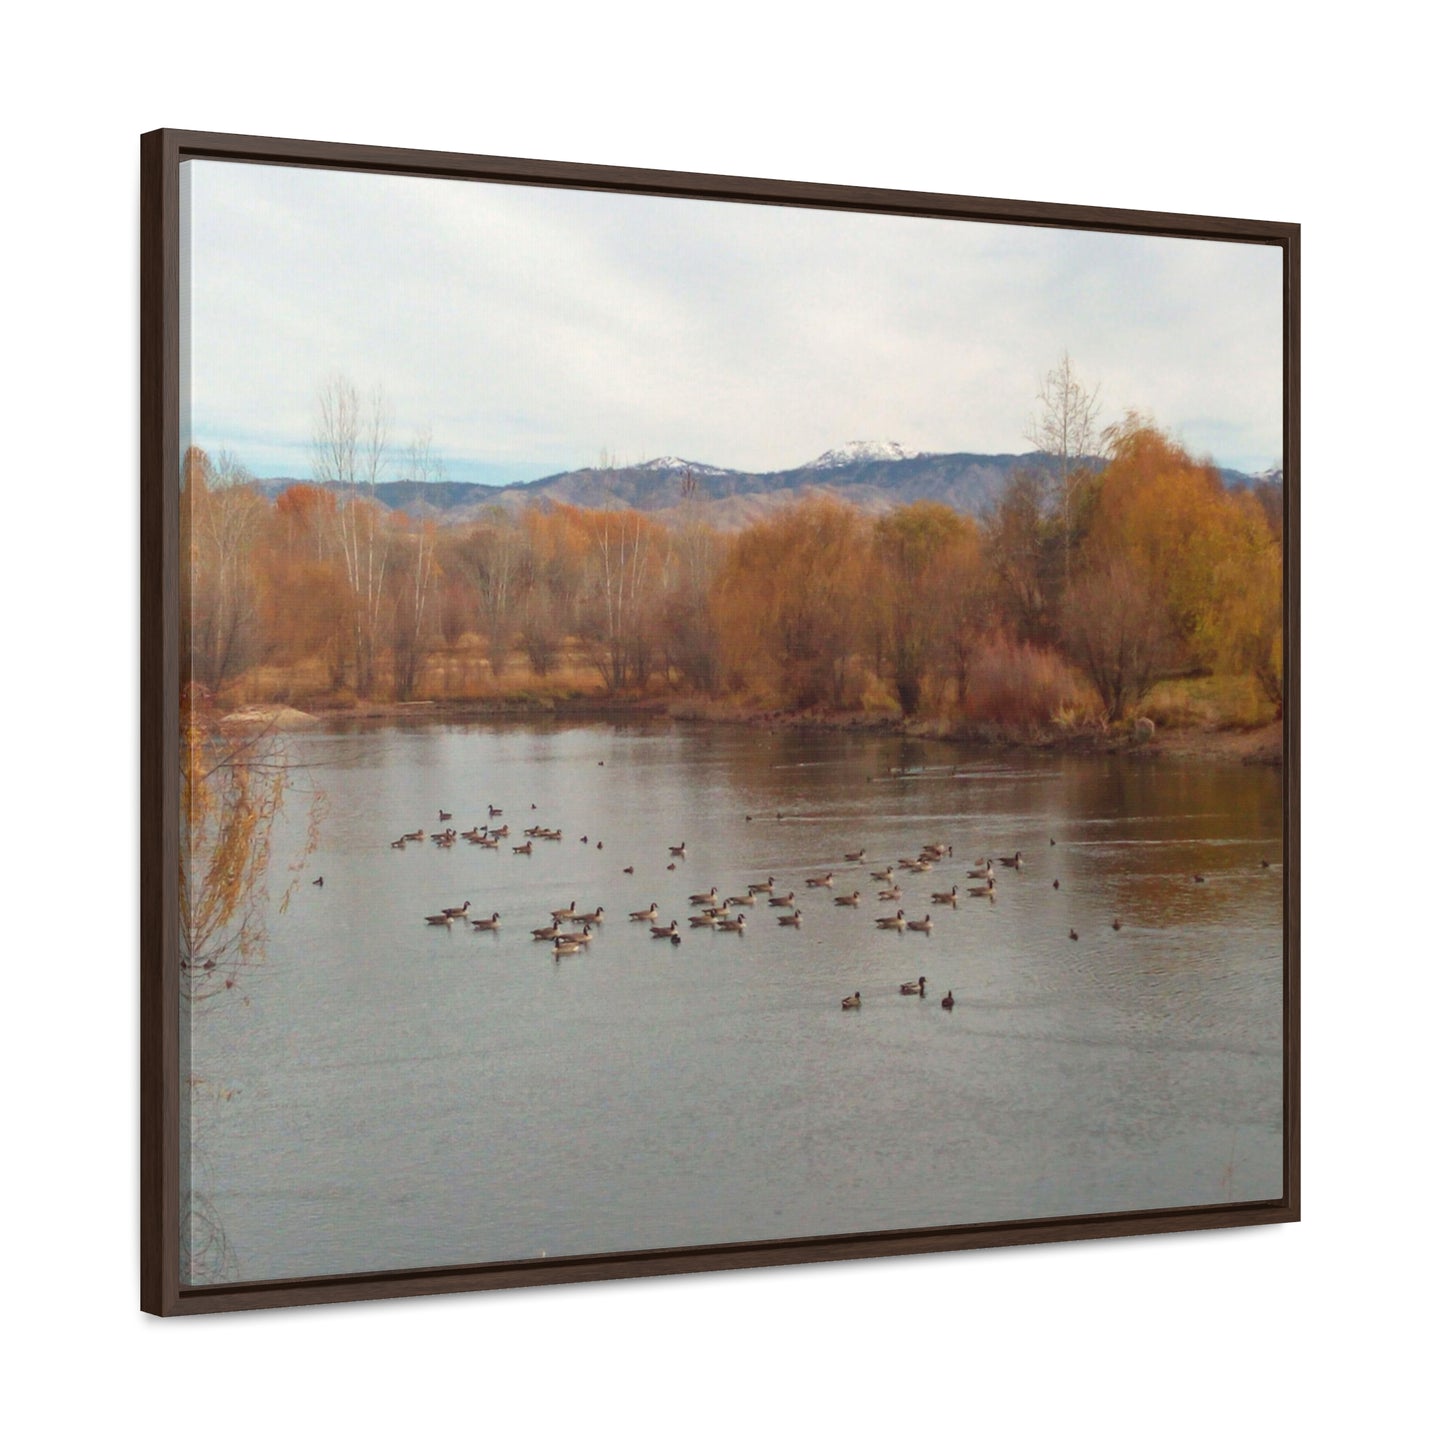 Autumn Pond with Geese Gallery Canvas Wraps Framed